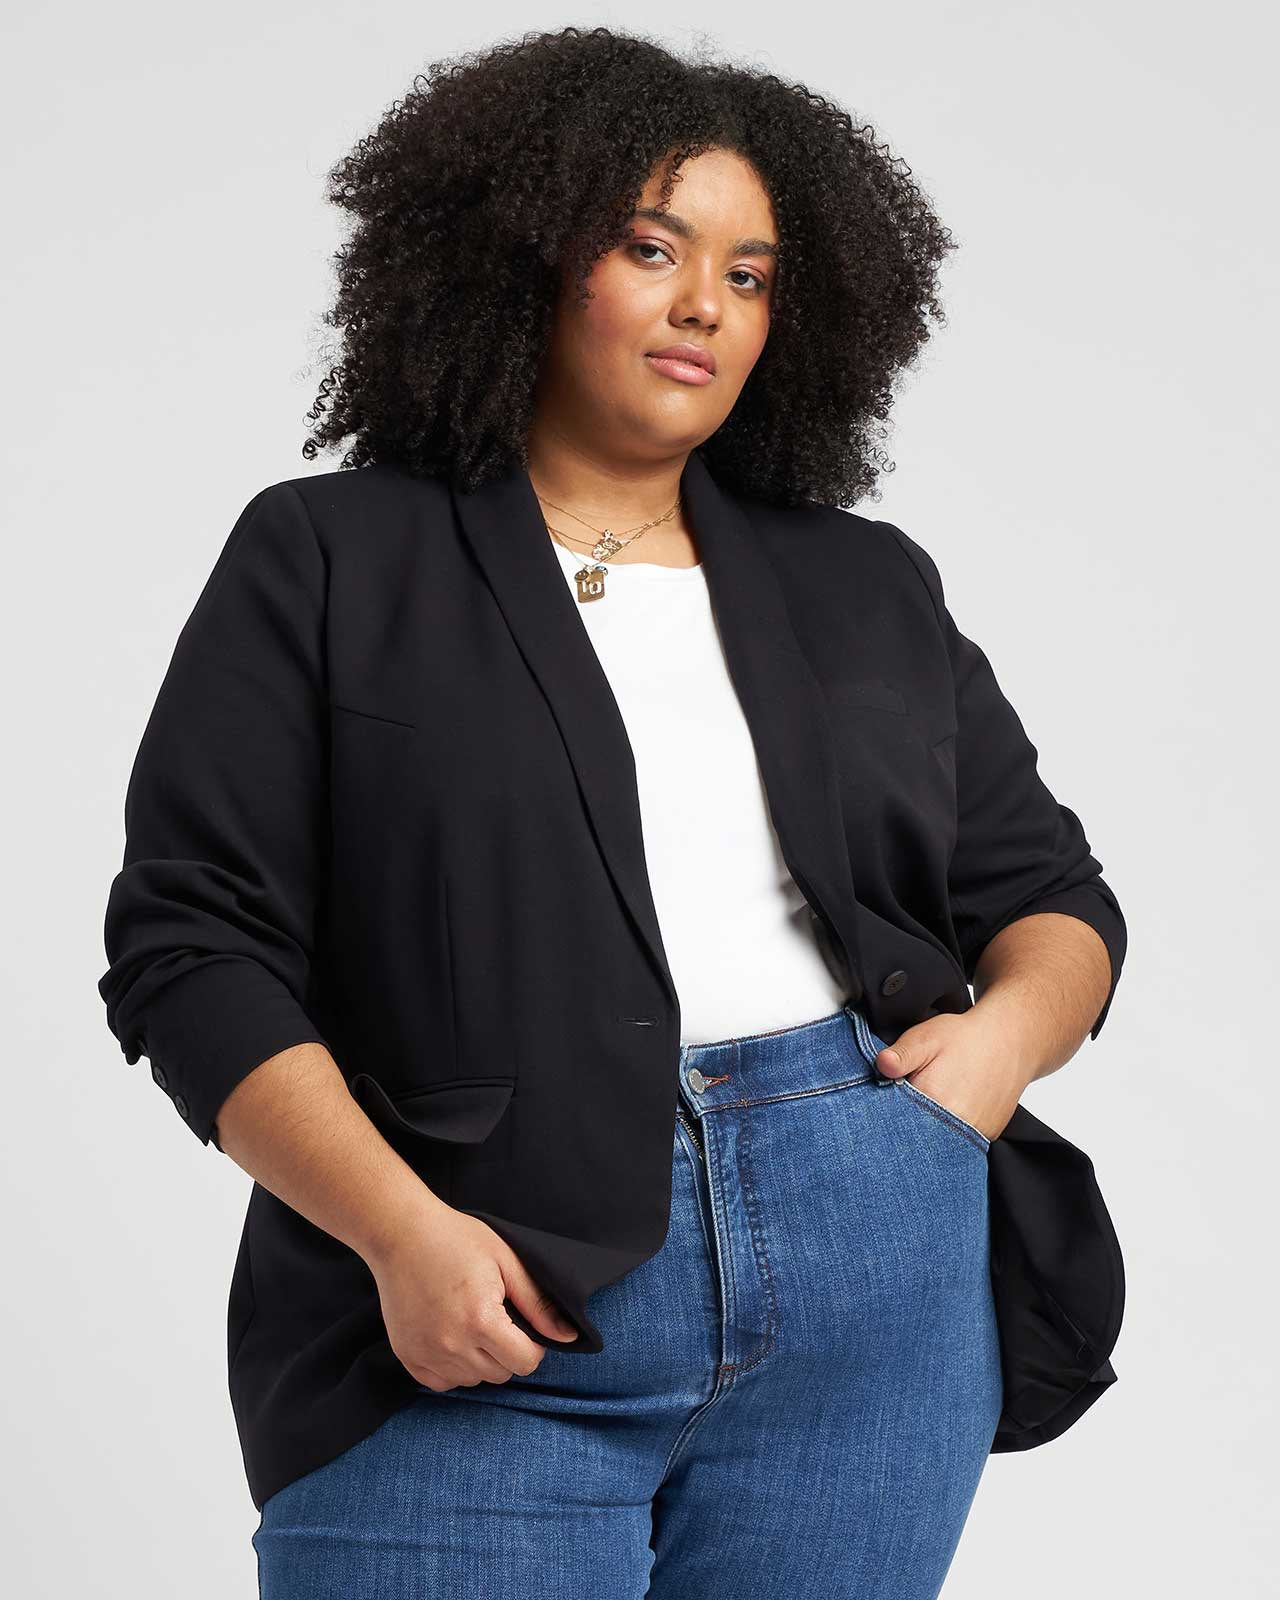 How to choose your plus size pants for work? – Margaret M